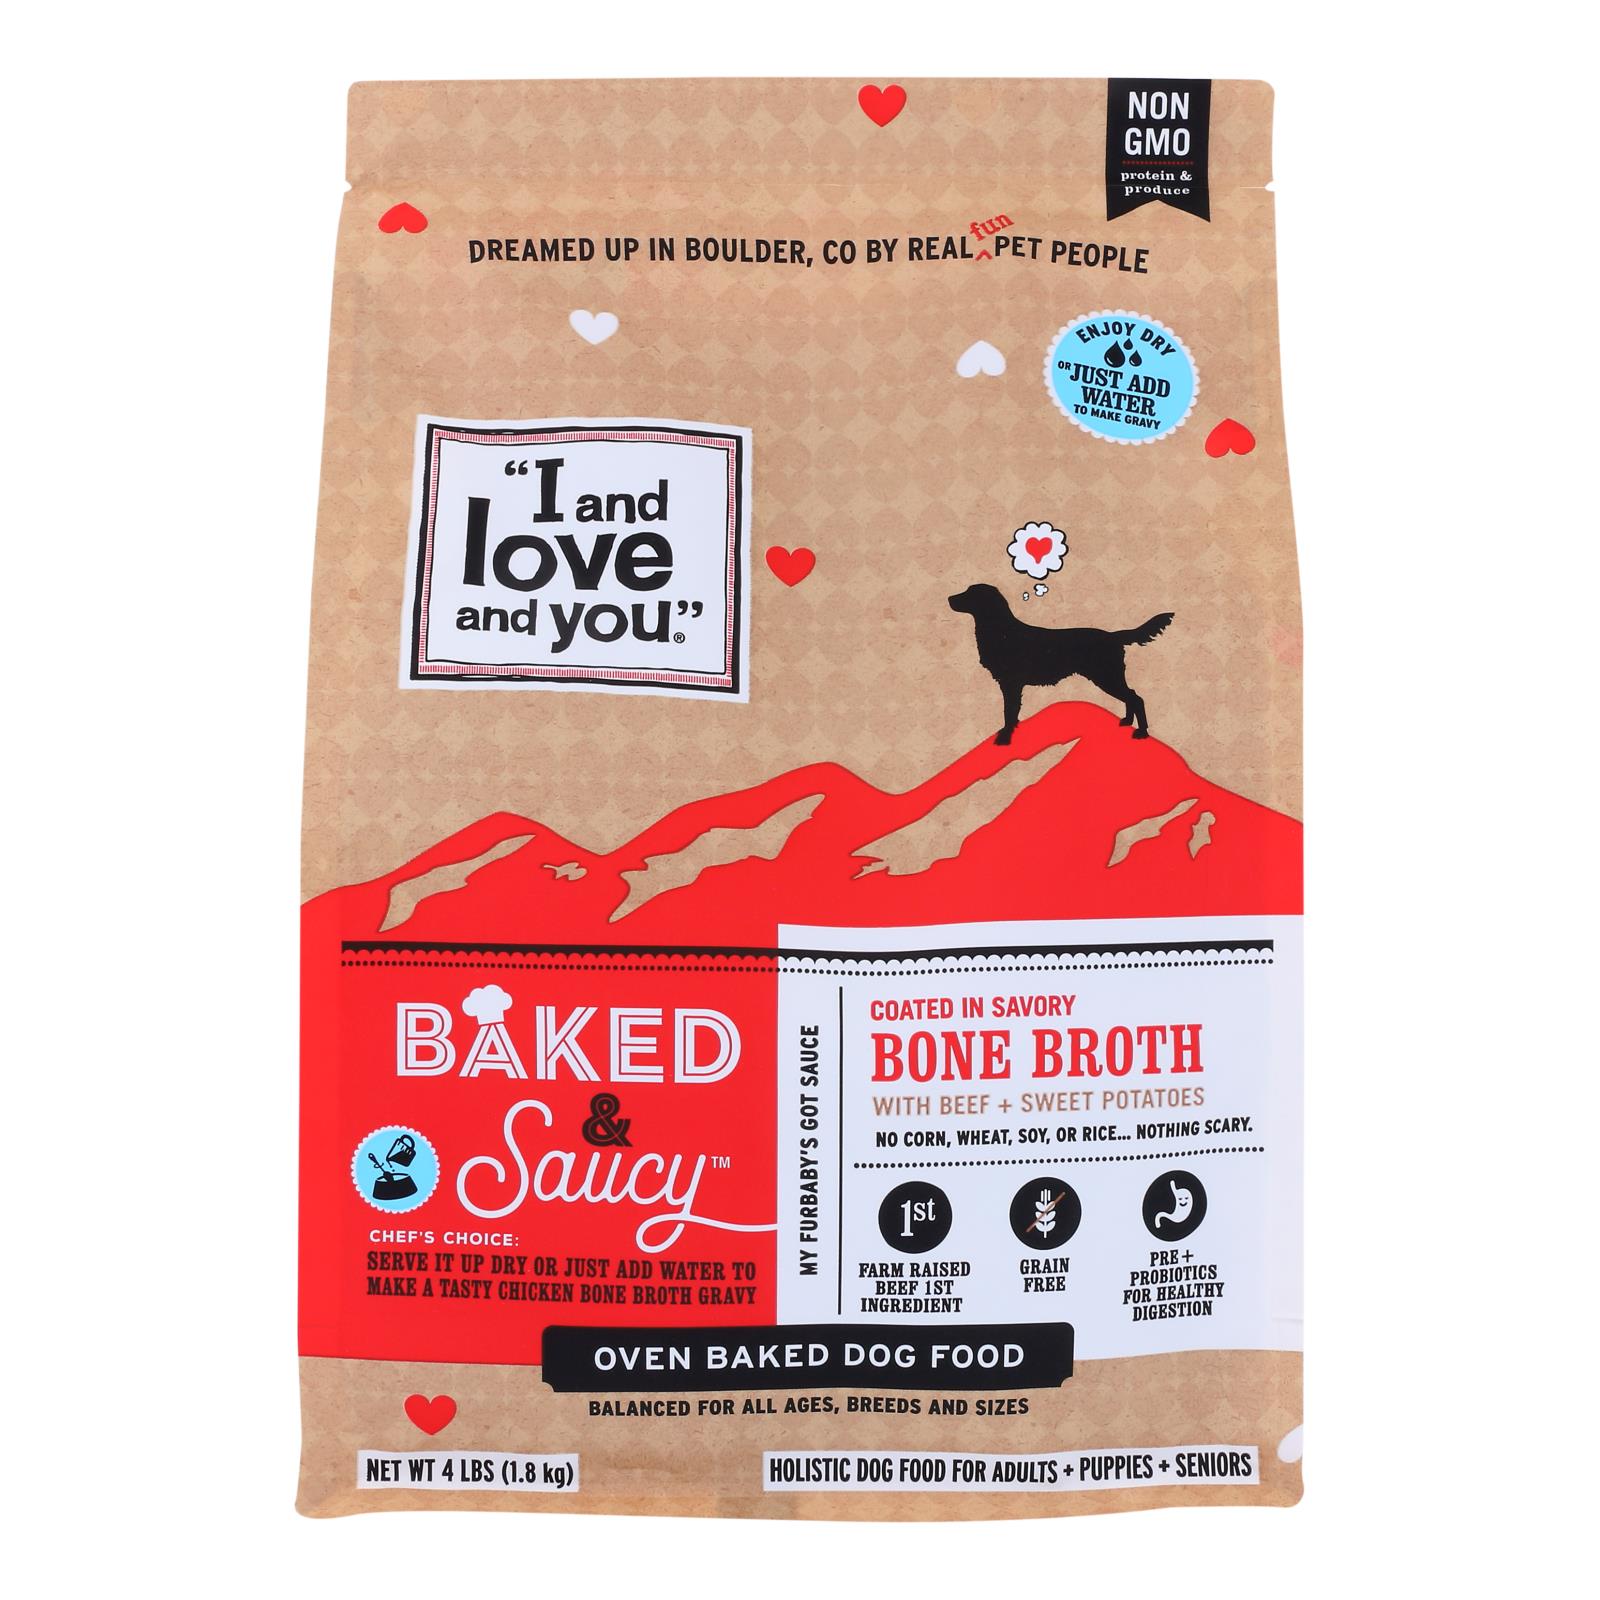 I And Love And You - Dog Food Baked Saucy Beef - 6개 묶음상품 - 4 LB